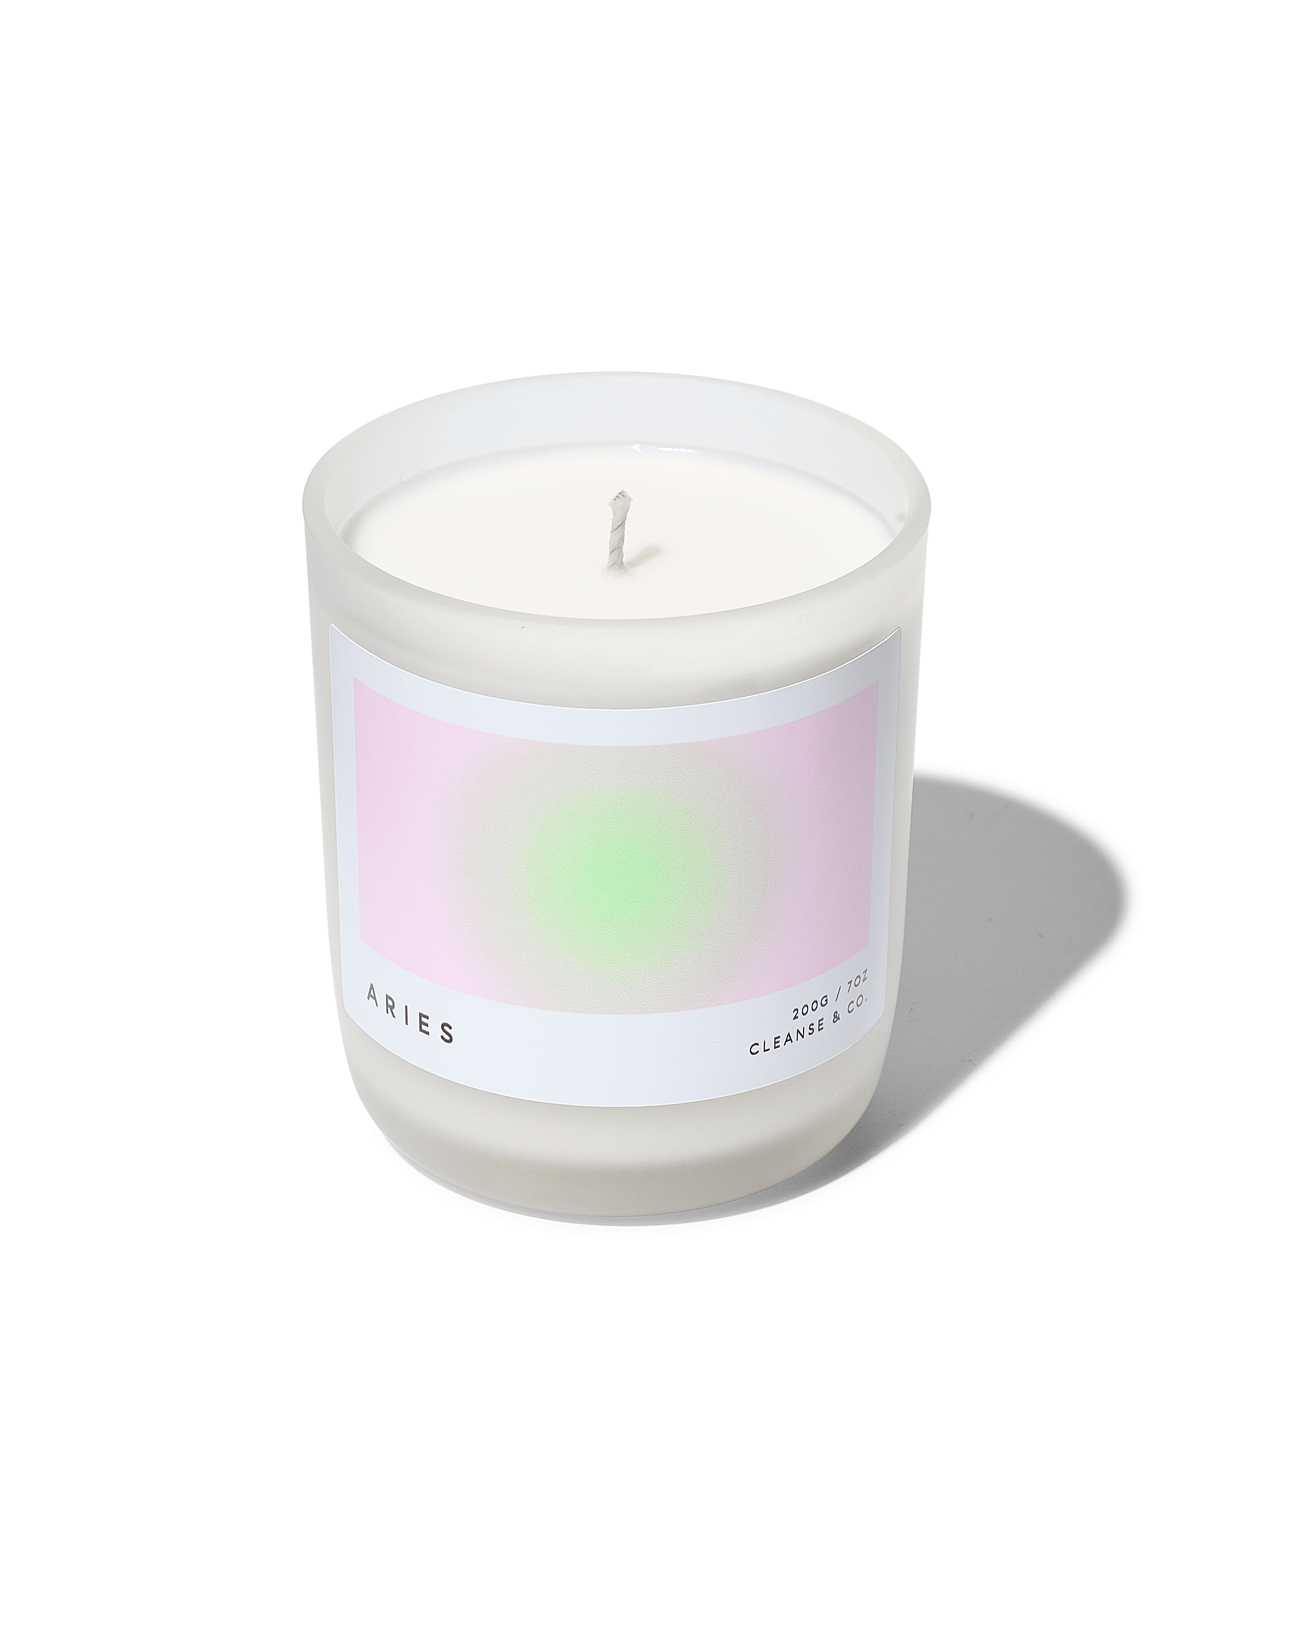 Aries - Aura Candle: 200G / Unscented by Cleanse & Co.